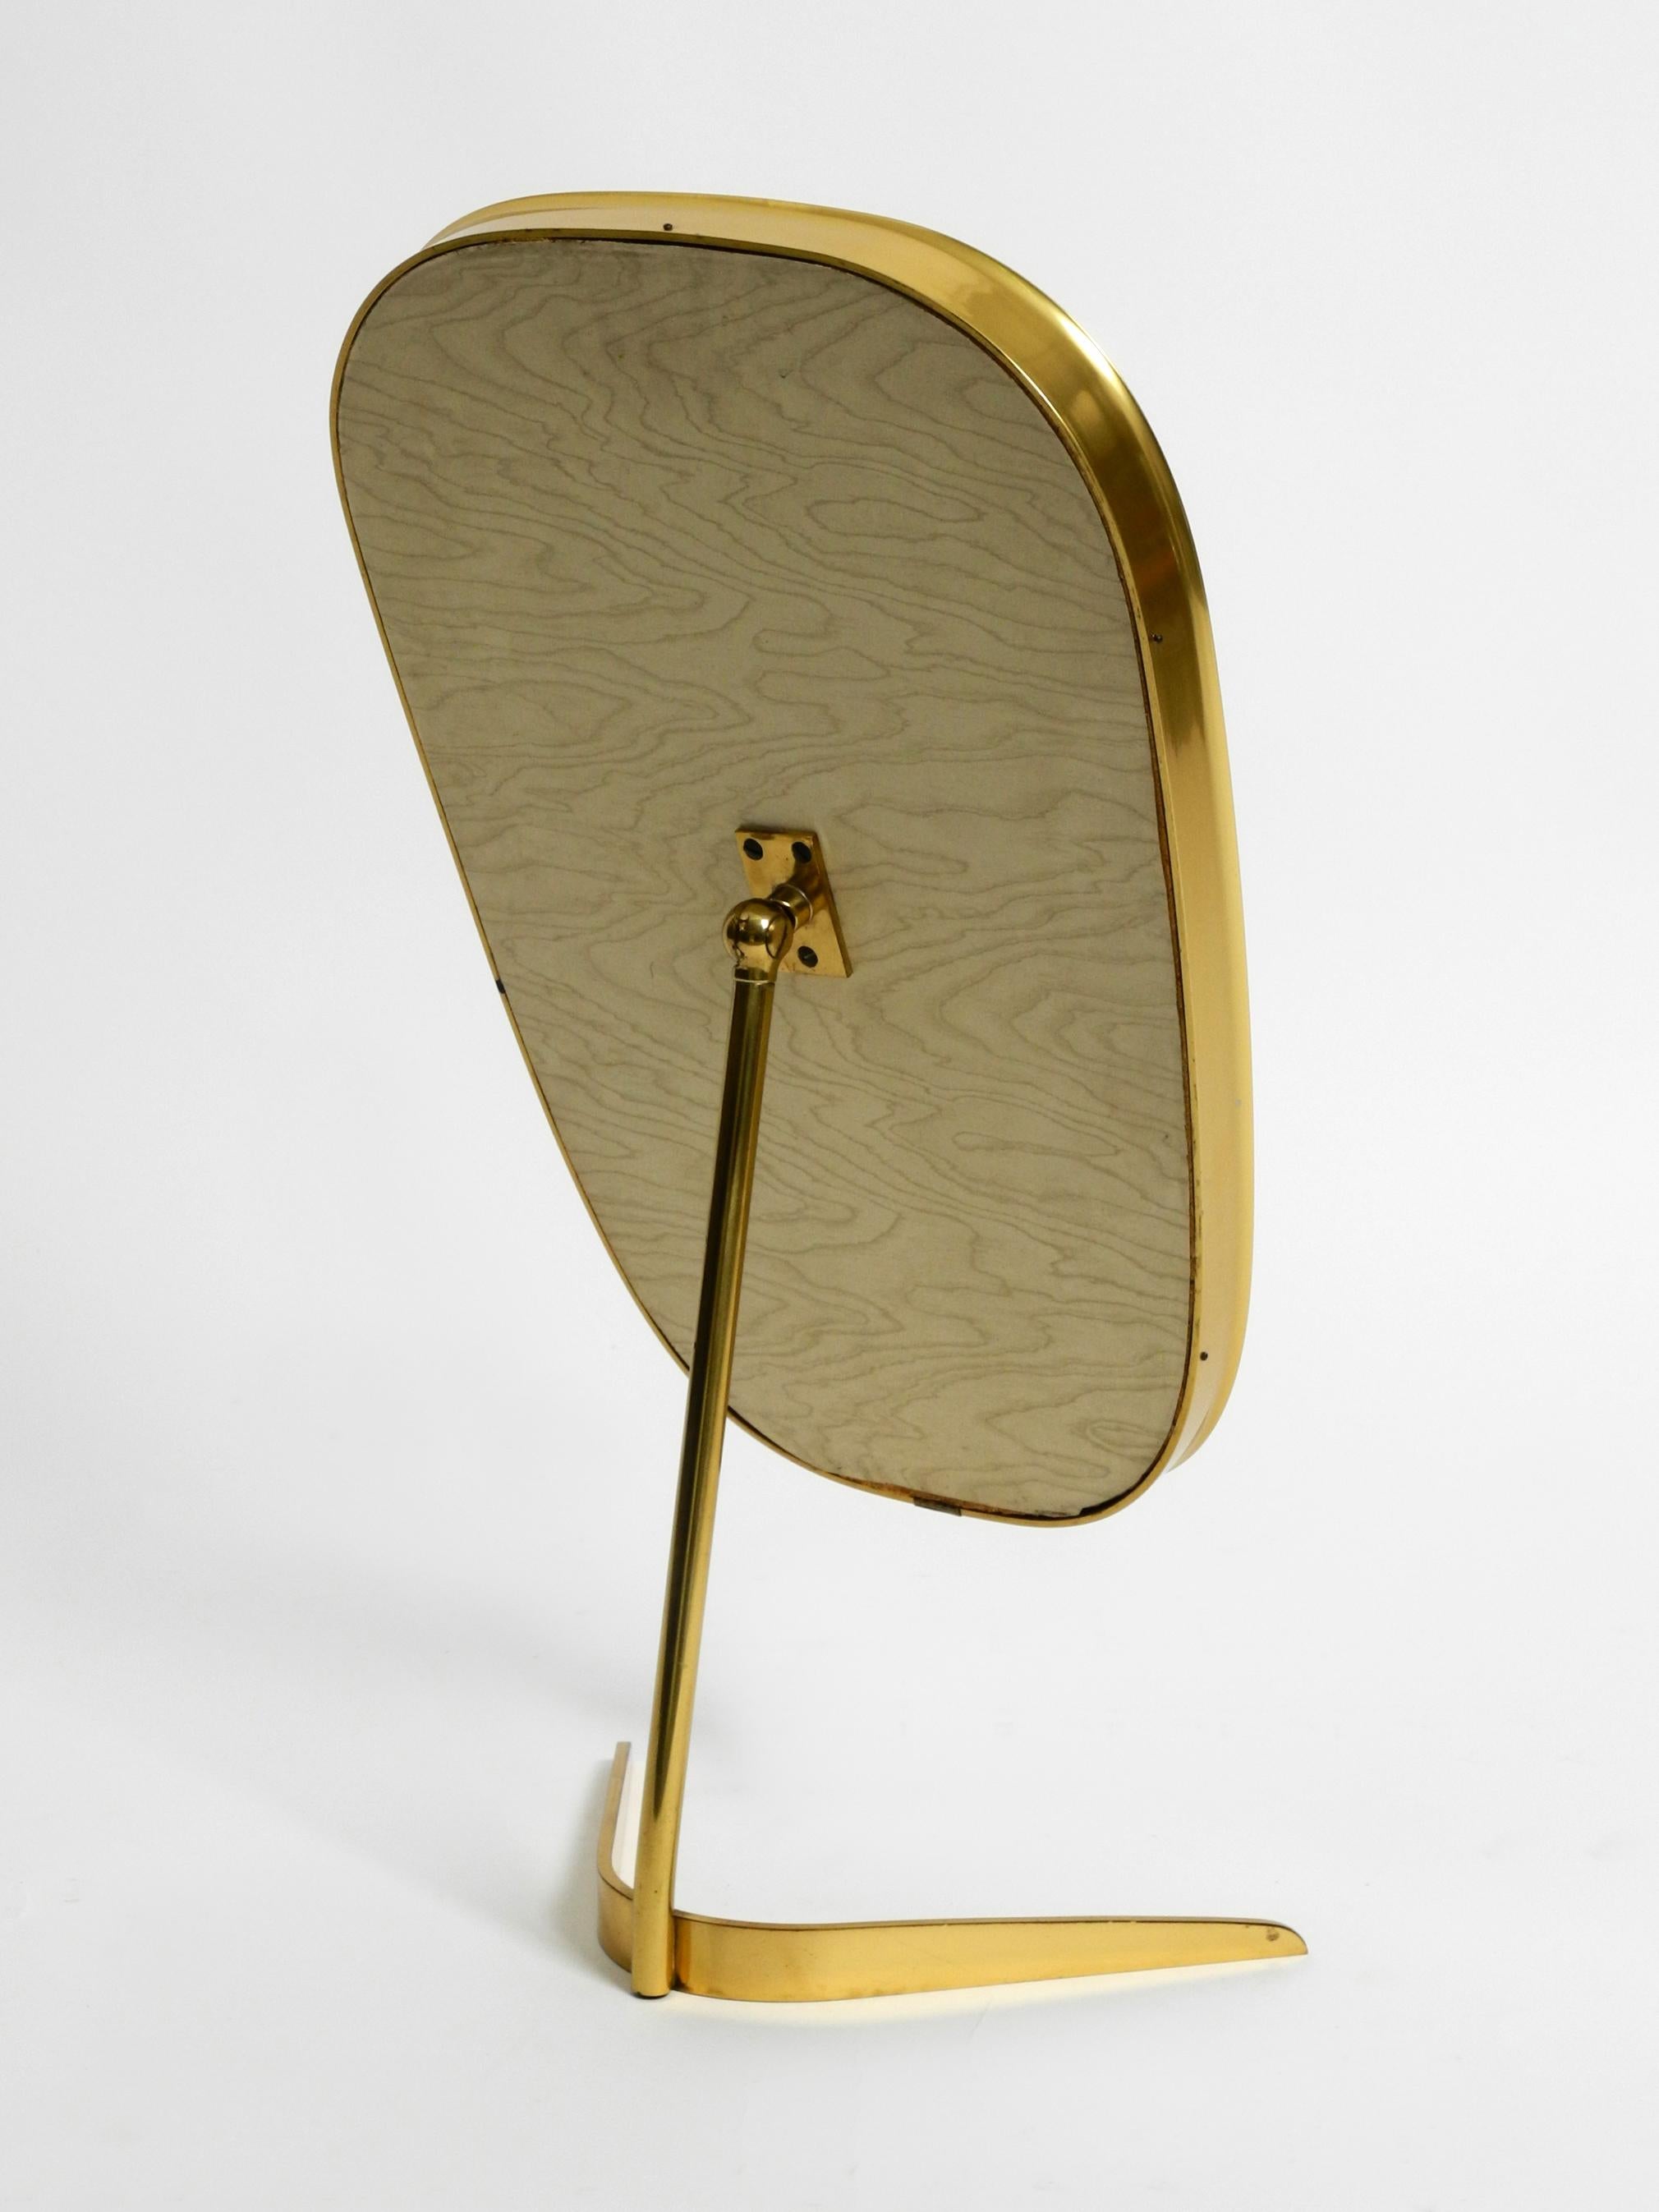 German Large Mid-Century Crow's Foot Table Mirror Made of Brass by Münchner Zierspiegel